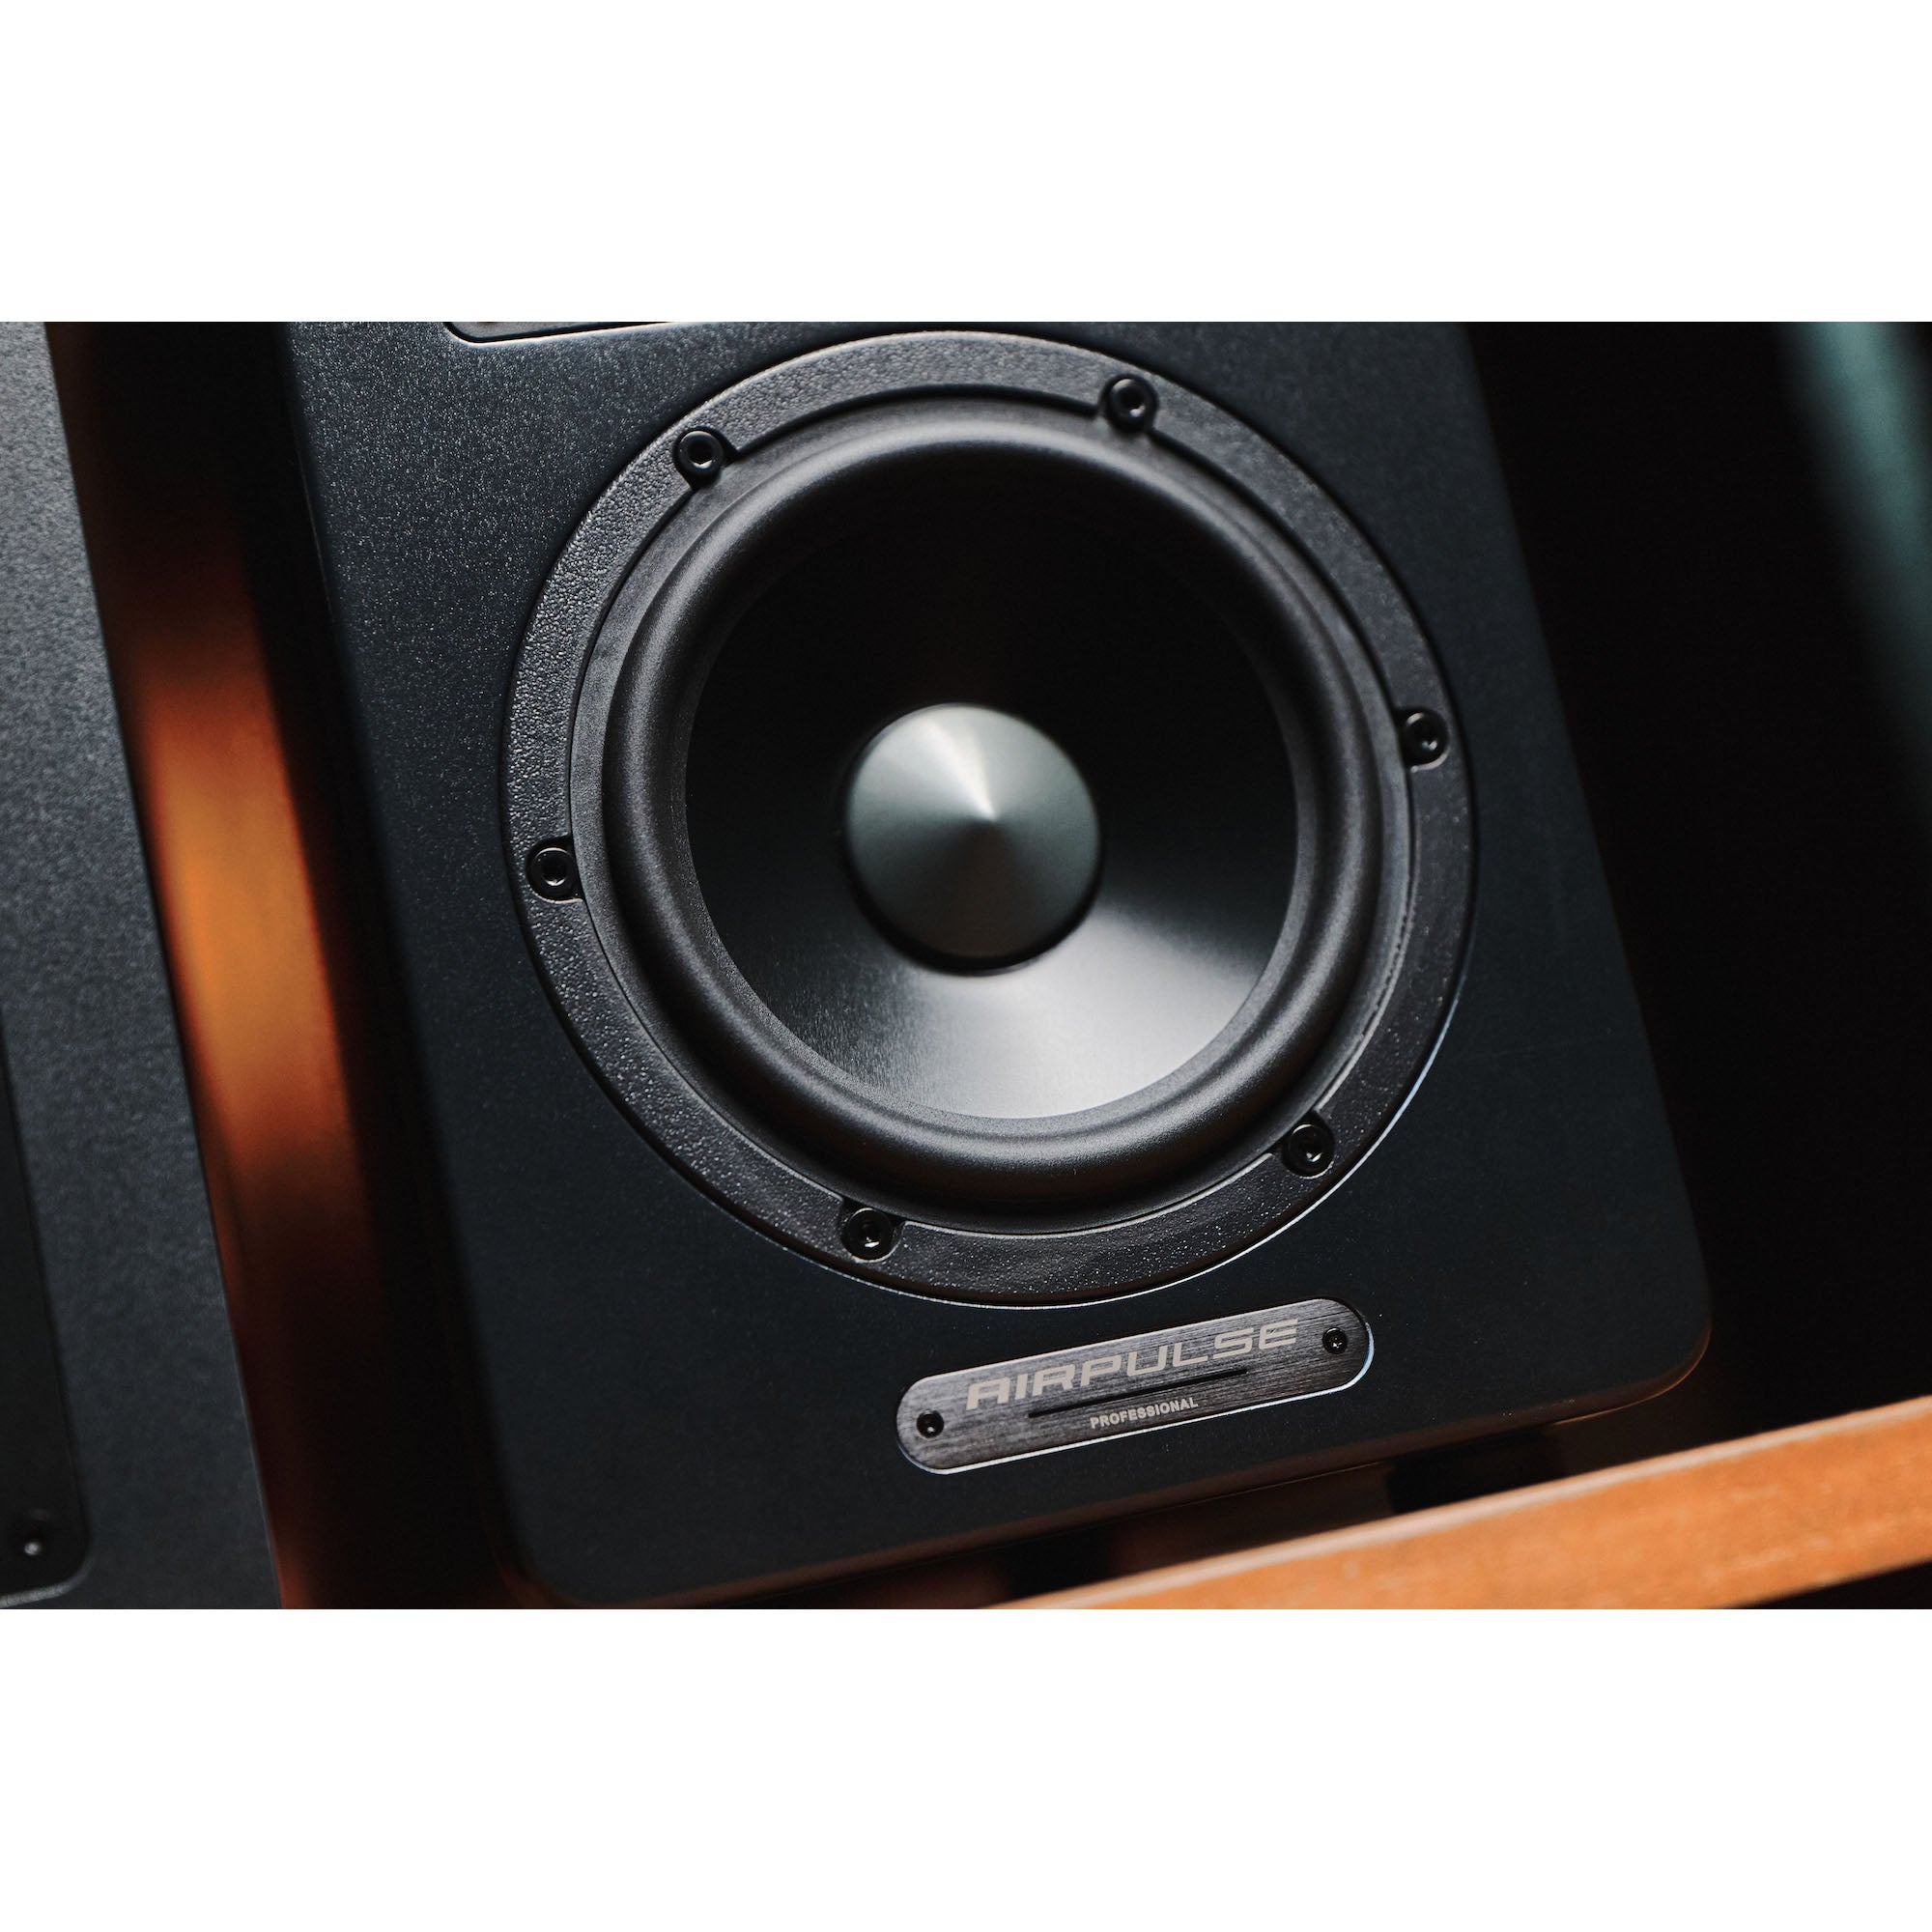 Airpulse SM200 Active Monitor Speakers